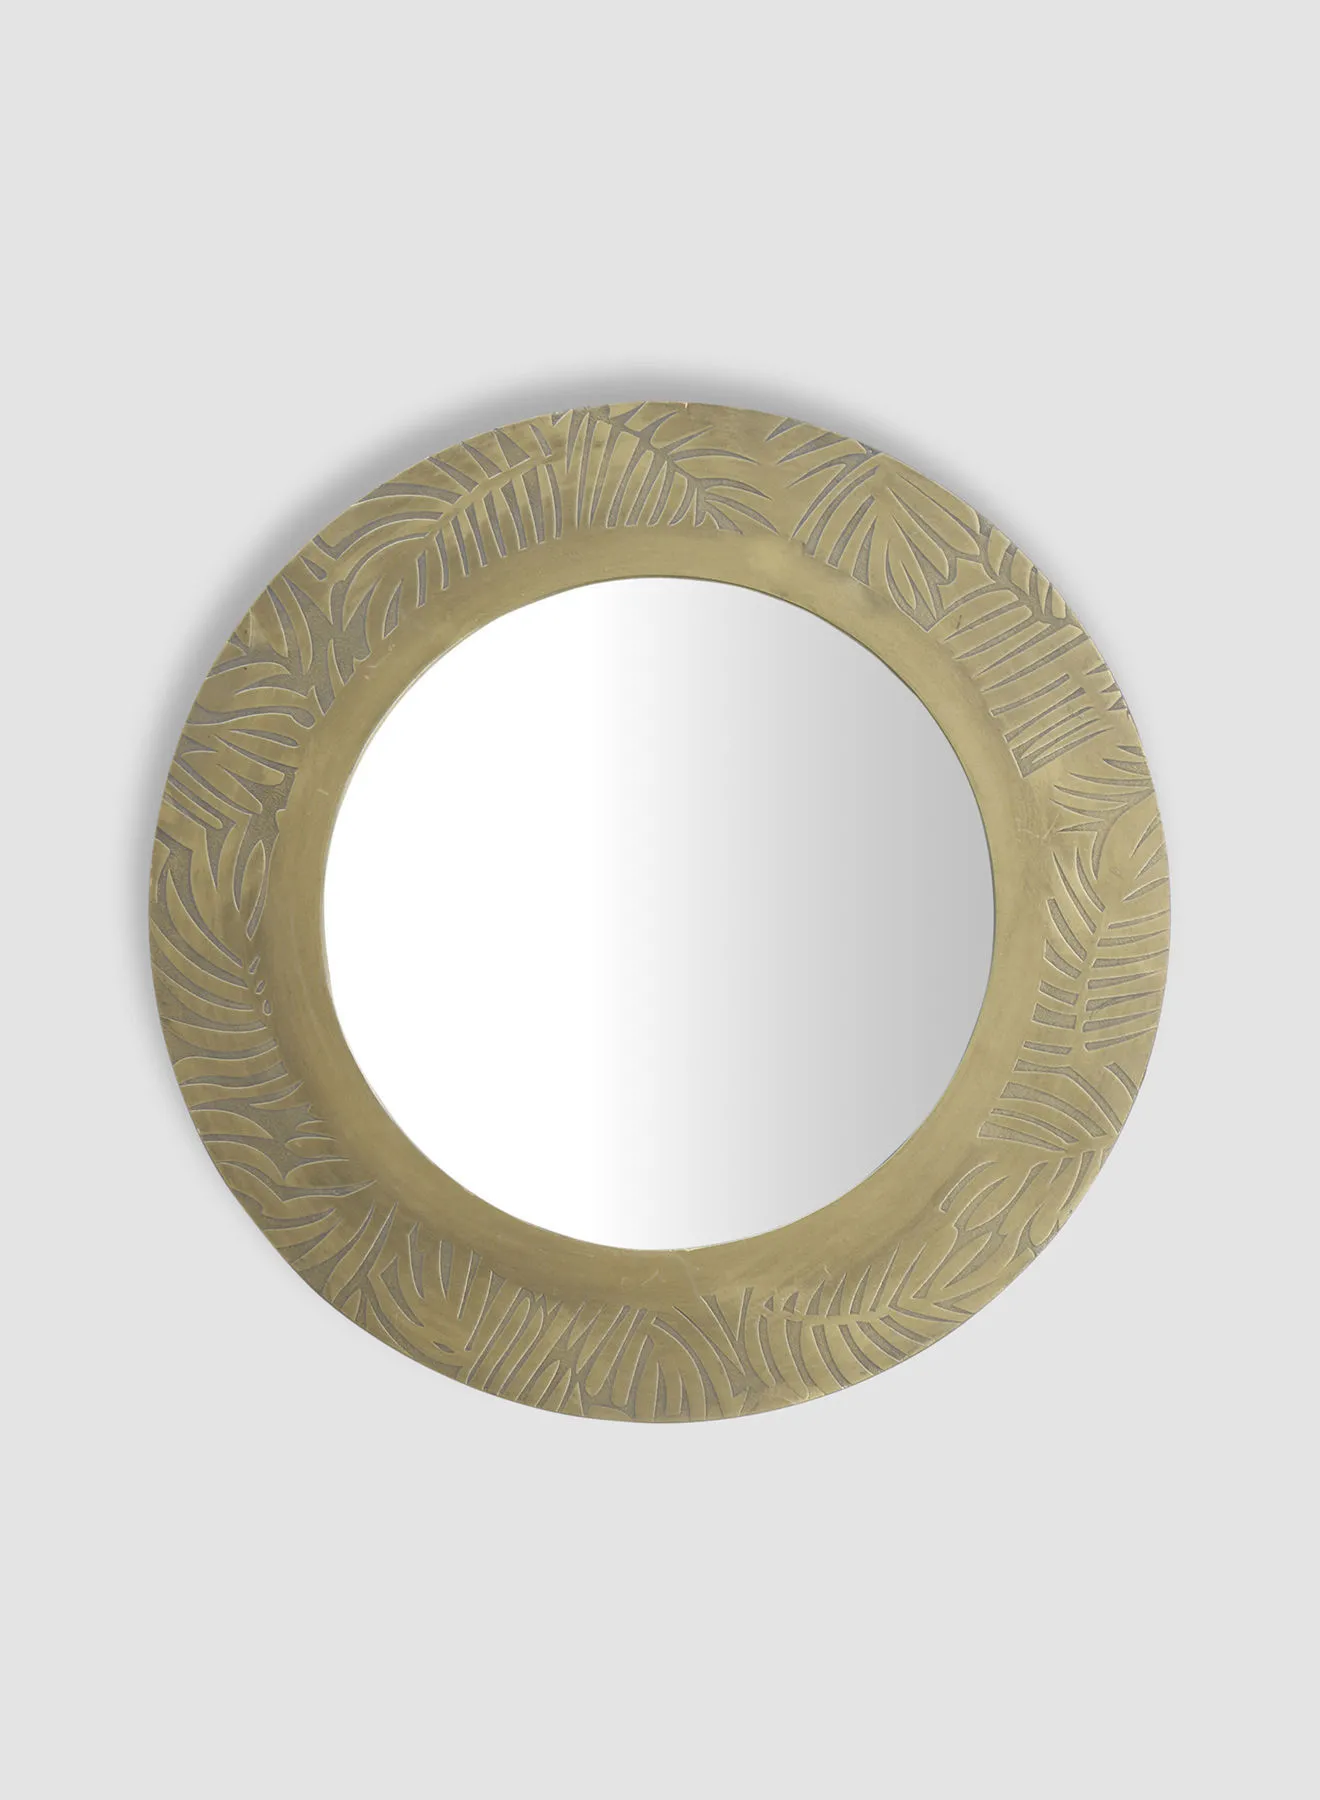 ebb & flow Decorative Mirror Unique Luxury Quality Material For The Perfect Stylish Home  AHI-022321231 Gold Dia60centimeter